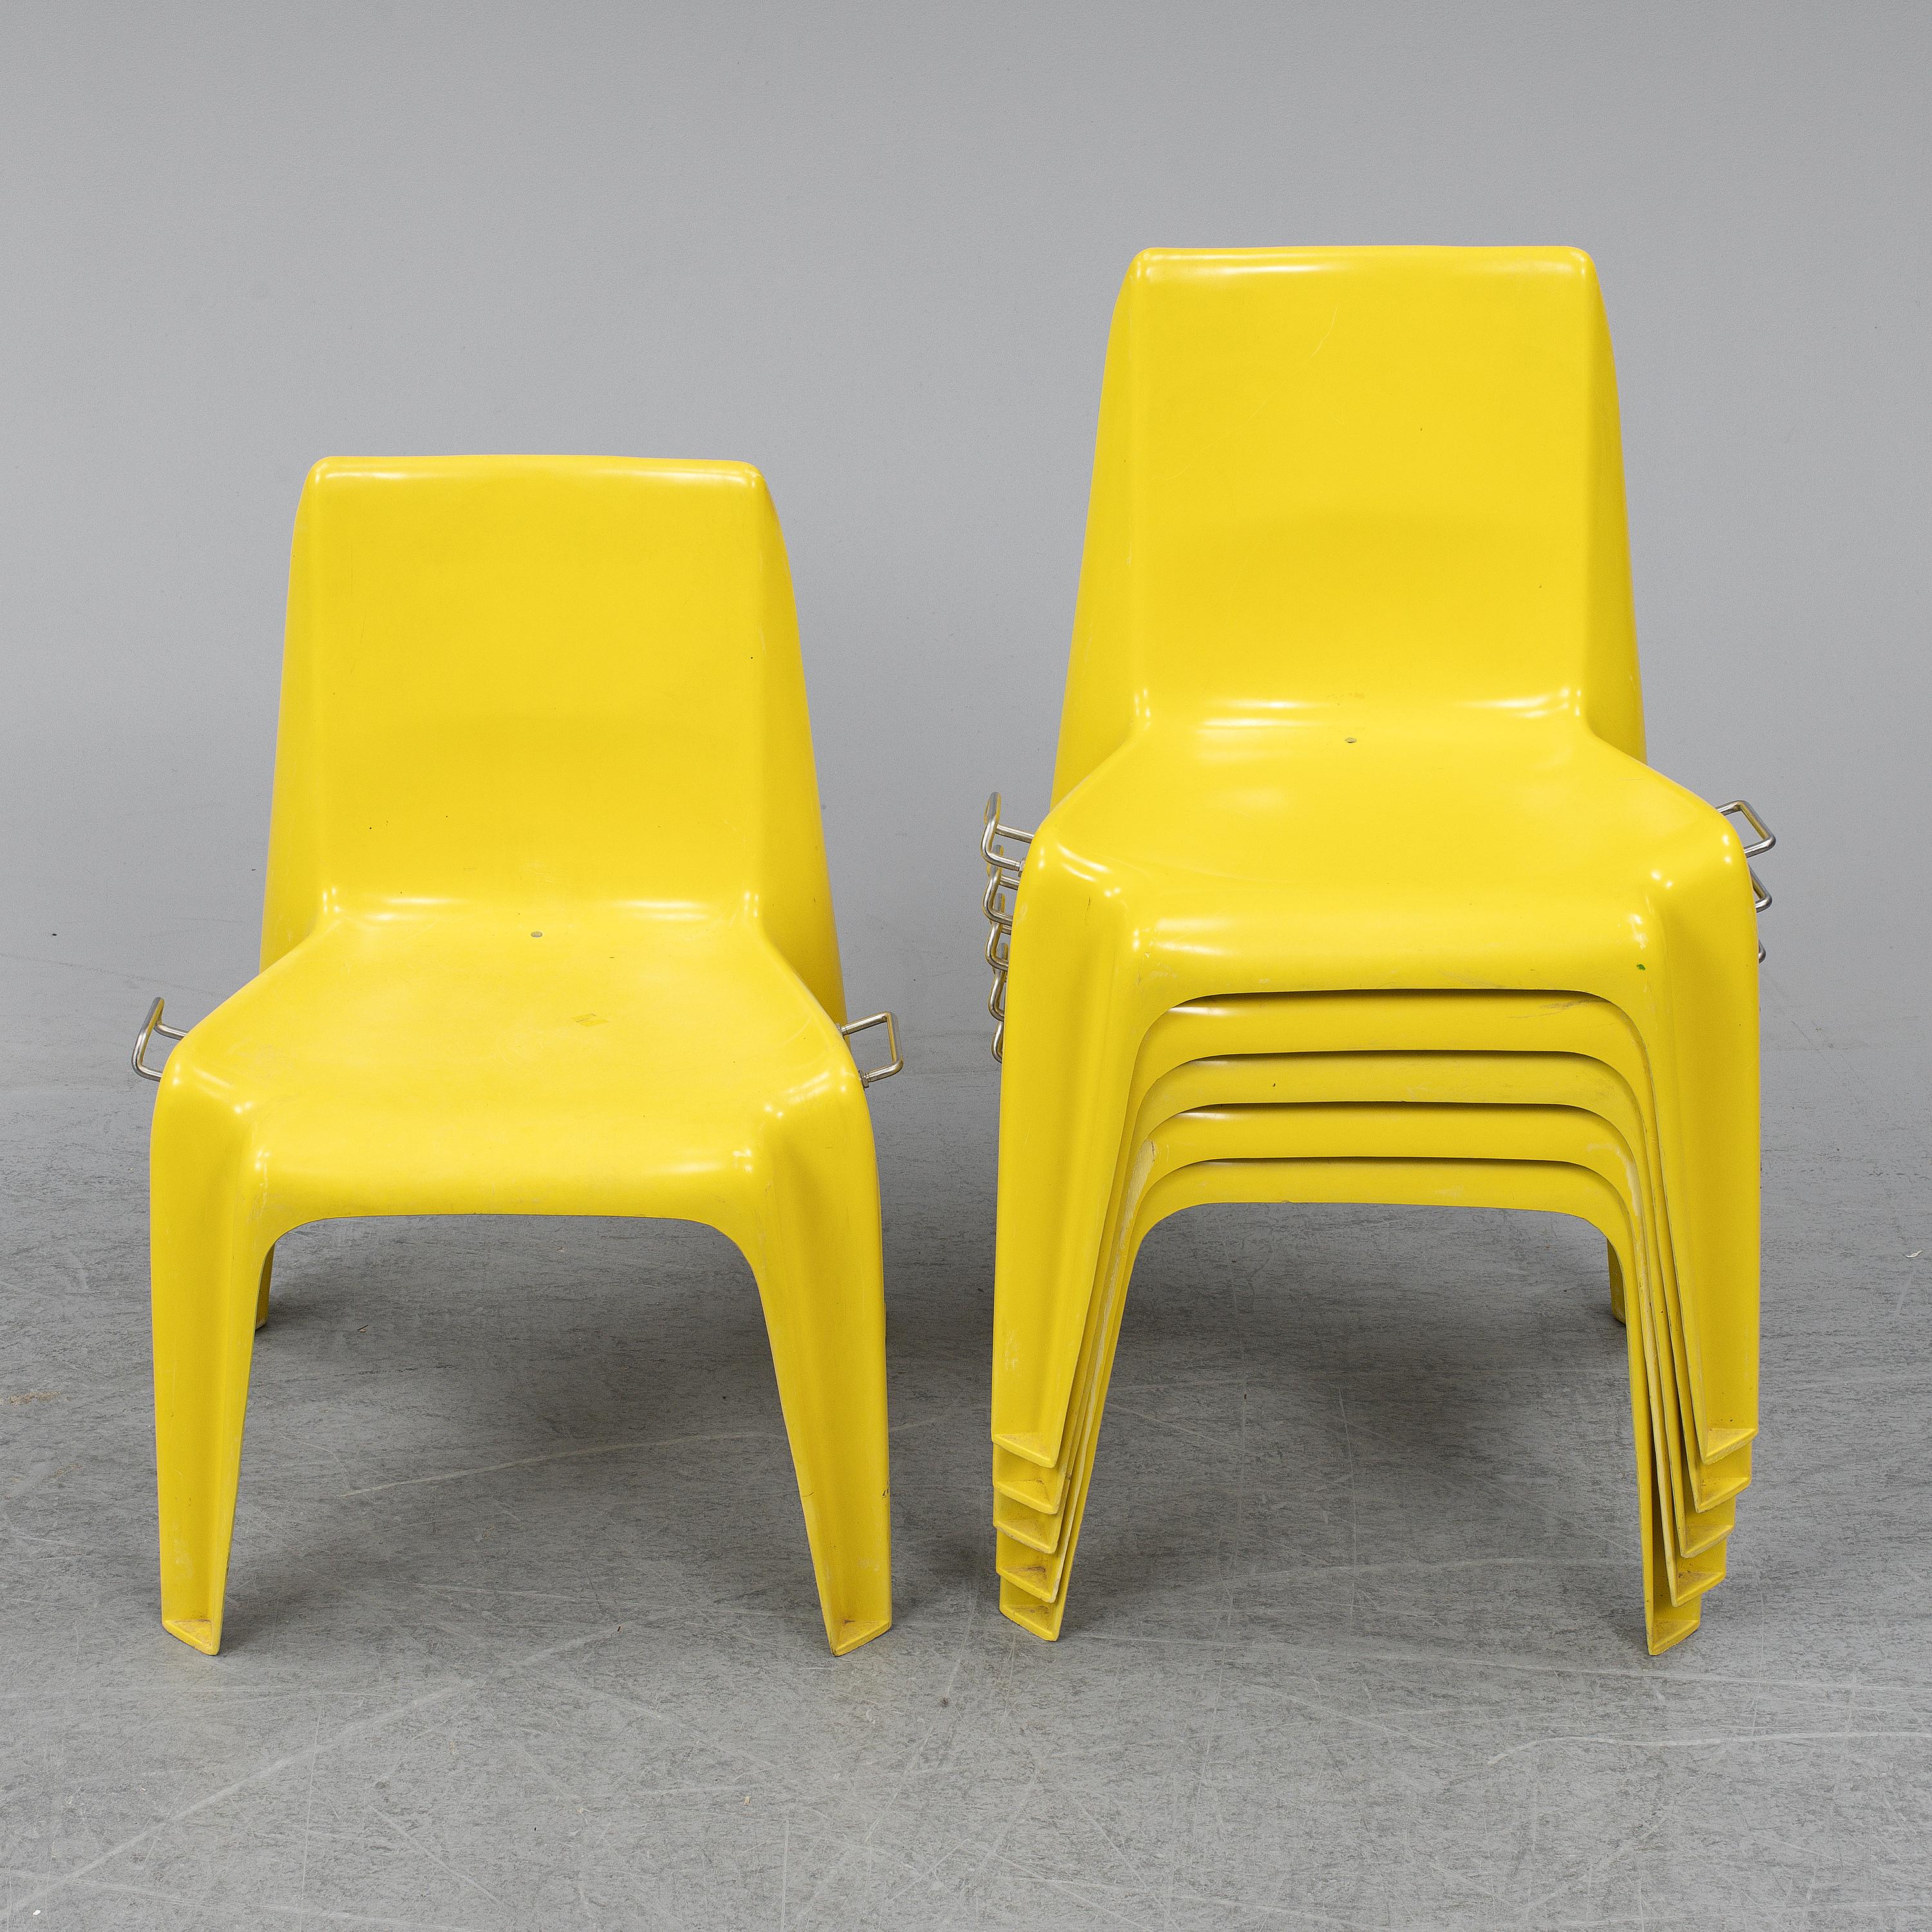 Mid-Century Modern Stackable Bofinger Yellow Chairs by Helmut Batzner, First Edition